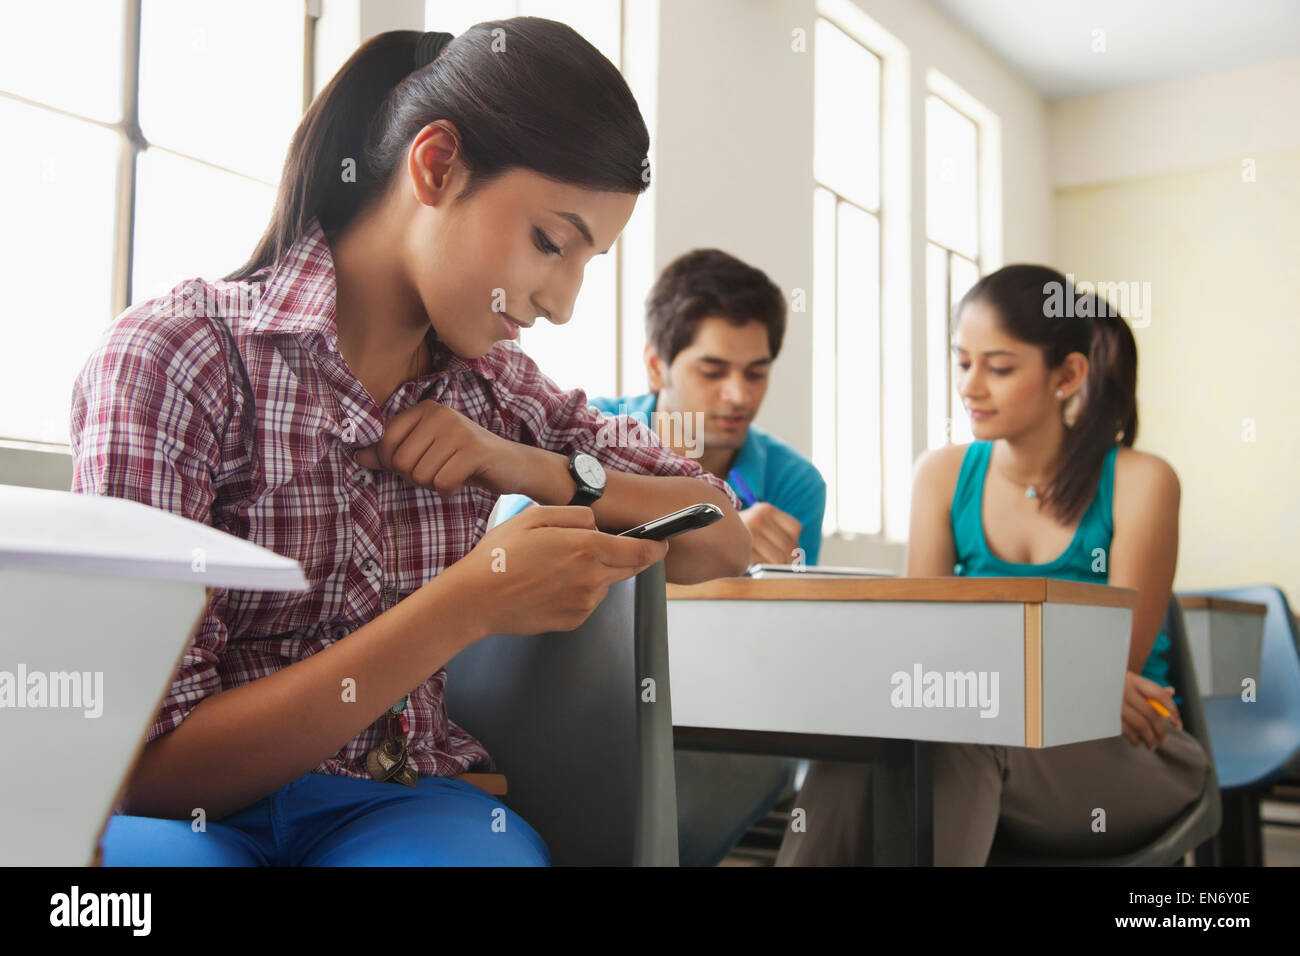 College student daydreaming in classroom Stock Photo